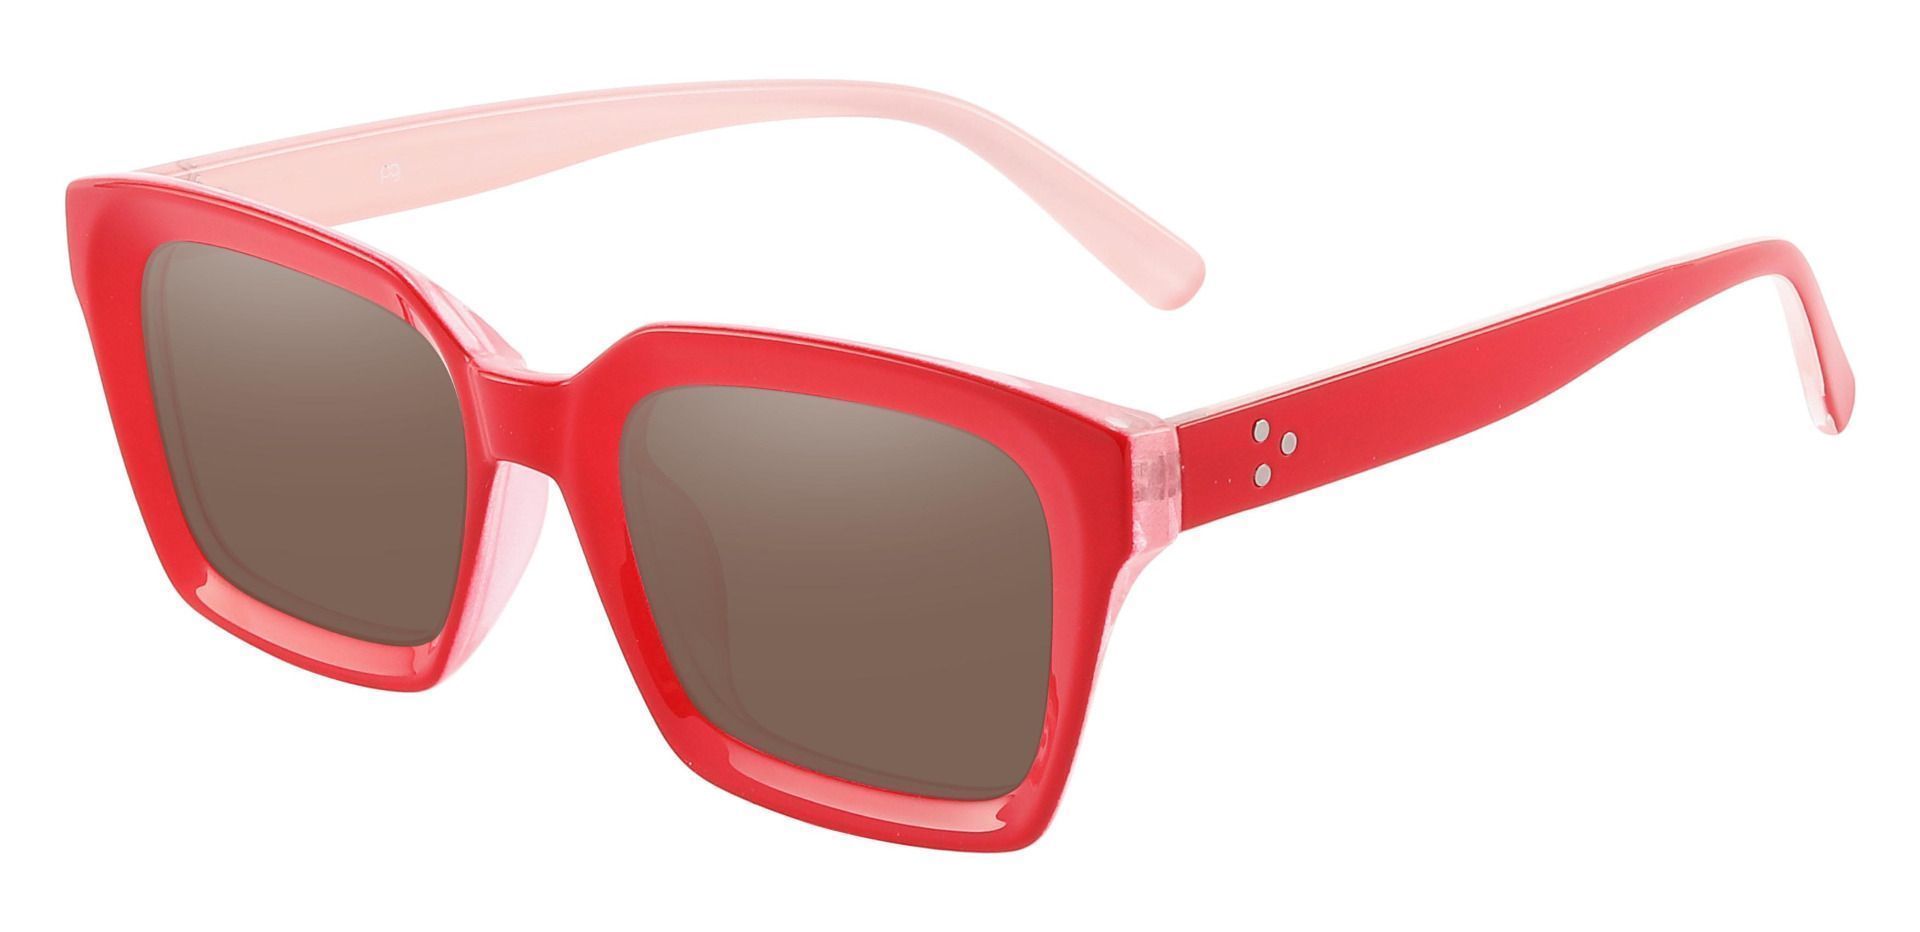 Unity Rectangle Non-Rx Sunglasses - Red Frame With Brown Lenses